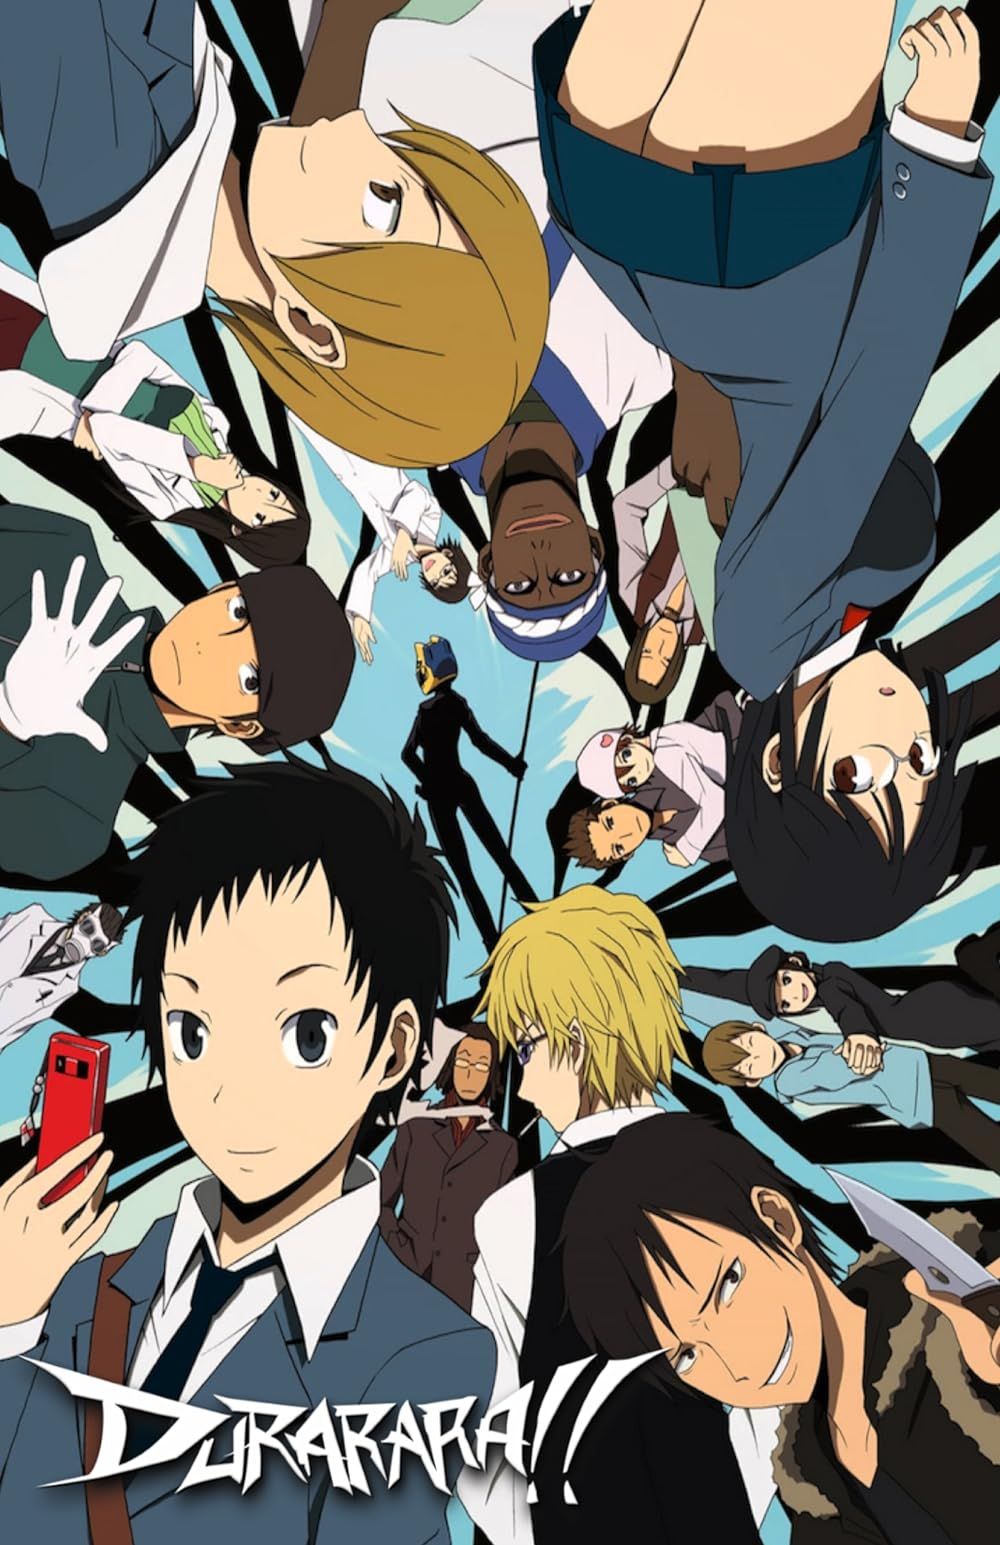 The Main Cast of Durarara!! assembled in a circle on the promo.